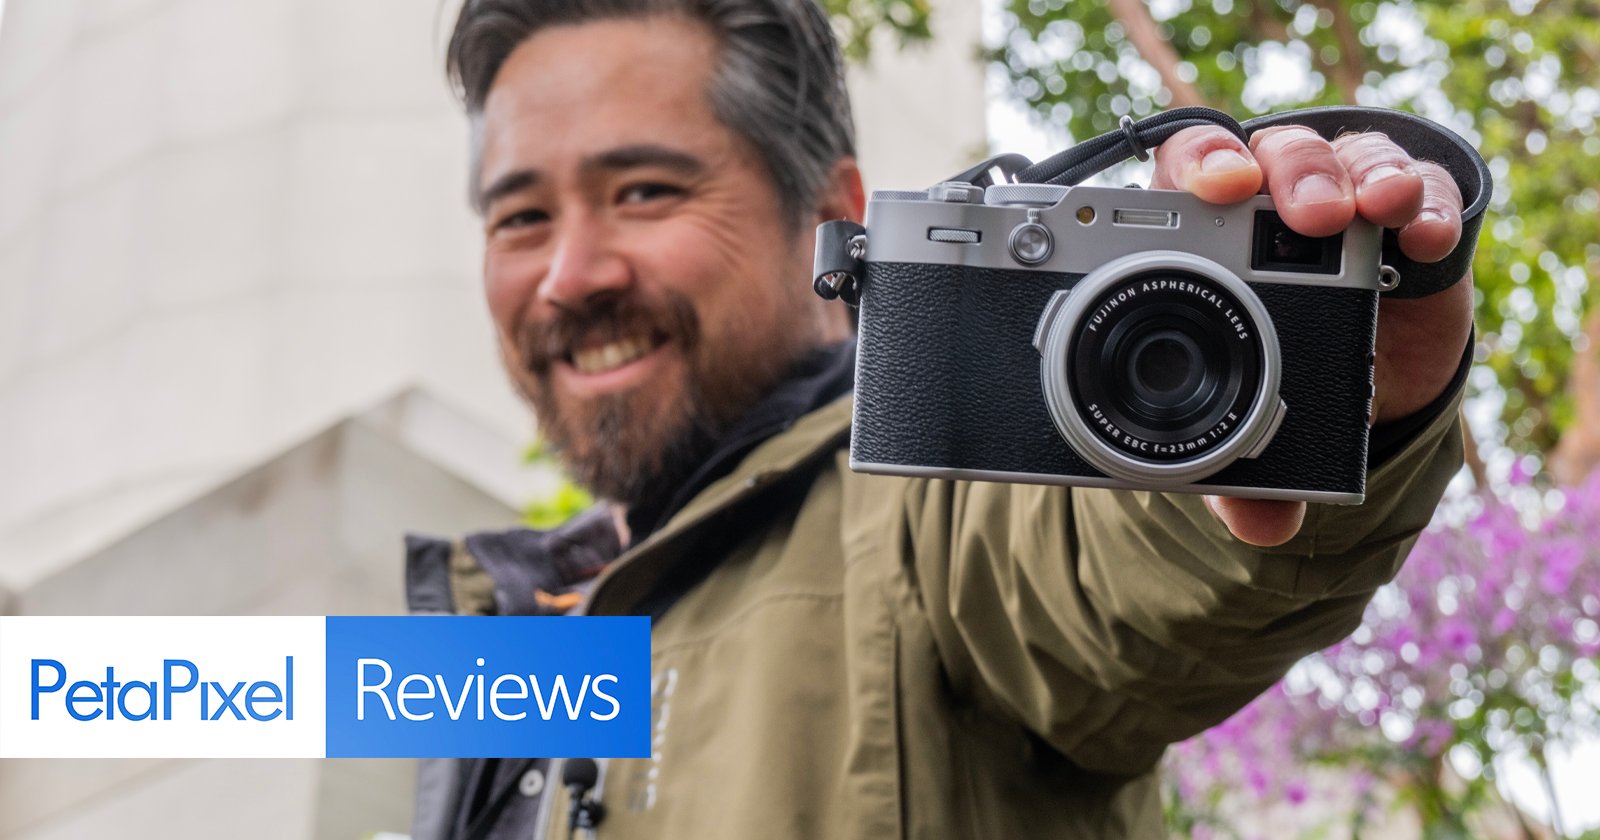 A smiling man holding a camera in front of him, focused on the lens, with "petapixel reviews" overlay text, in a garden setting.